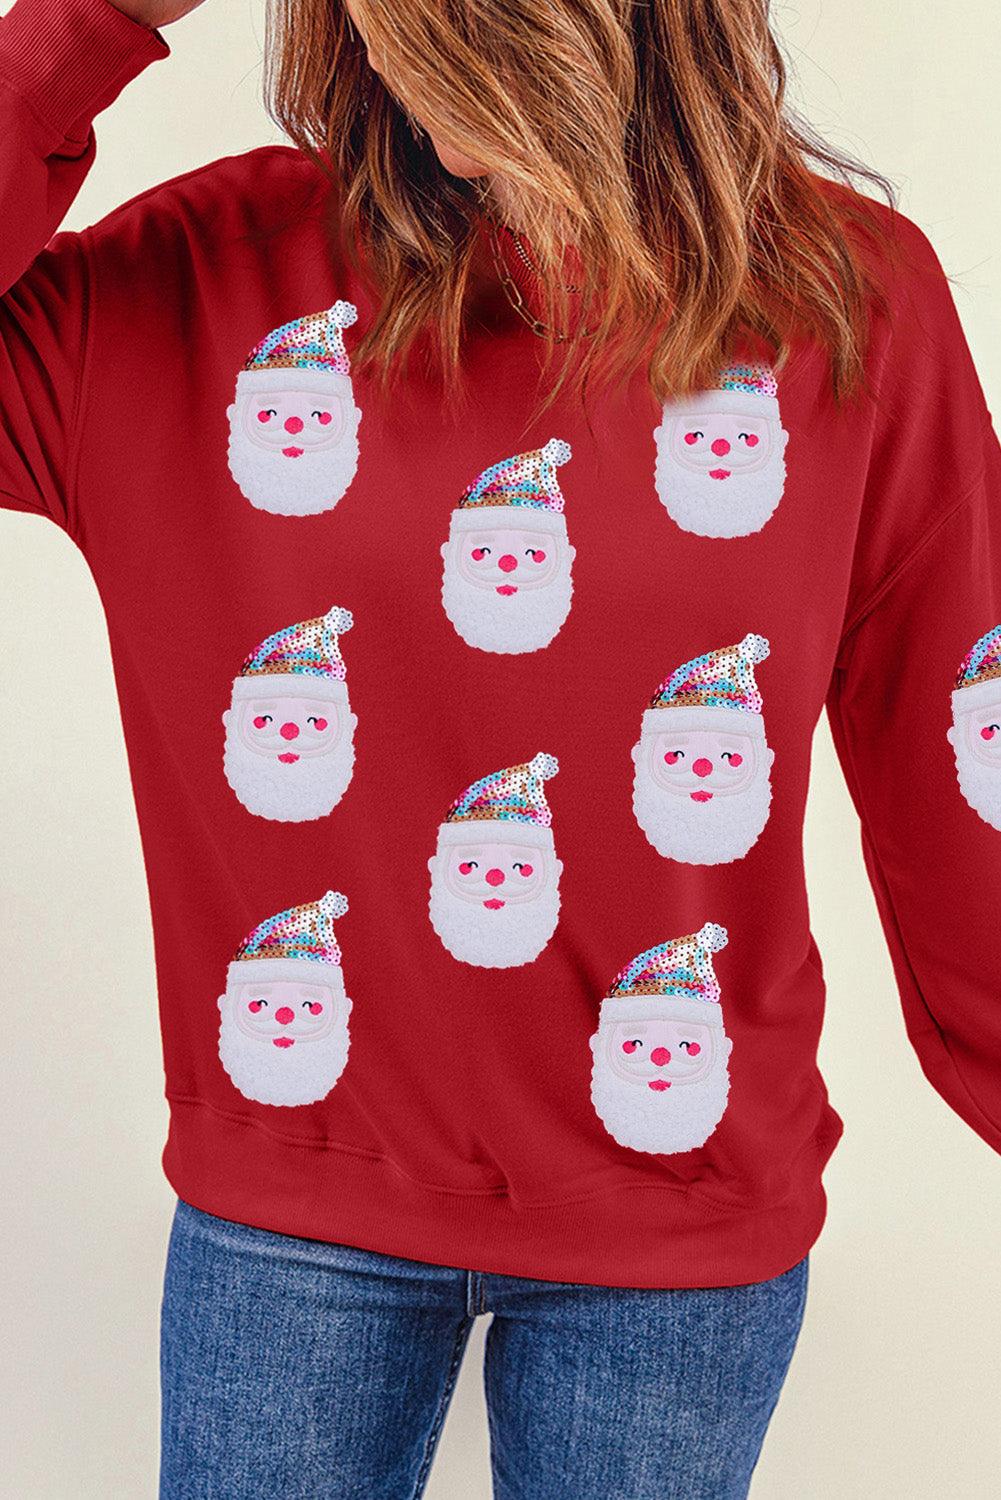 Red Sequined Christmas Santa Clause Graphic Sweatshirt - L & M Kee, LLC